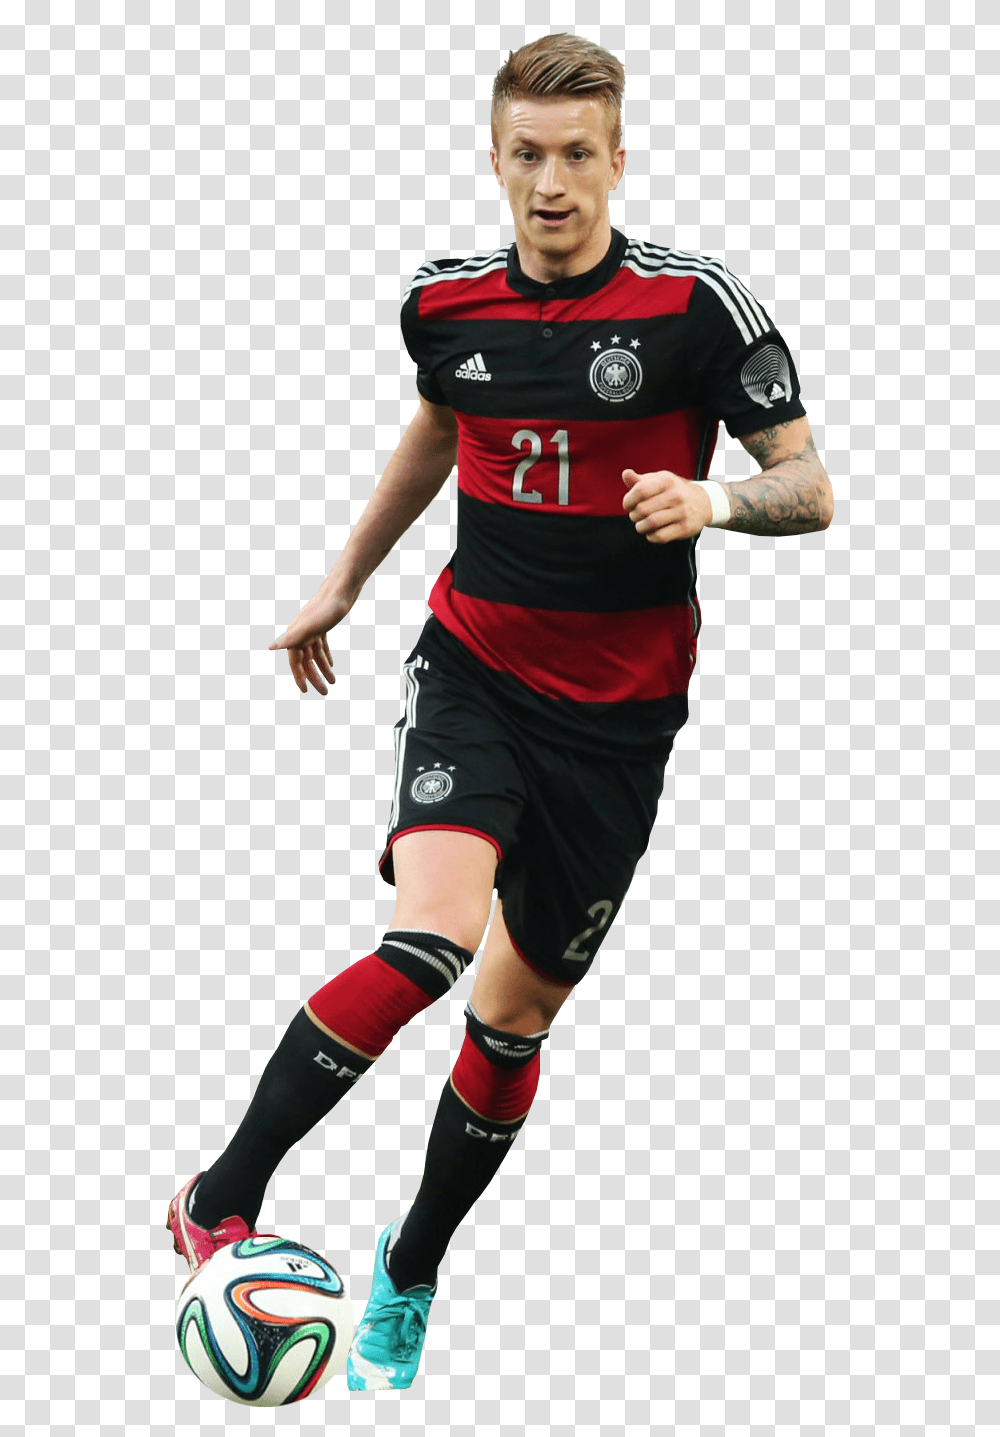 Marco Reus Alemania Augusto Bazn Player Soccer Player, Person, Sphere, Soccer Ball Transparent Png